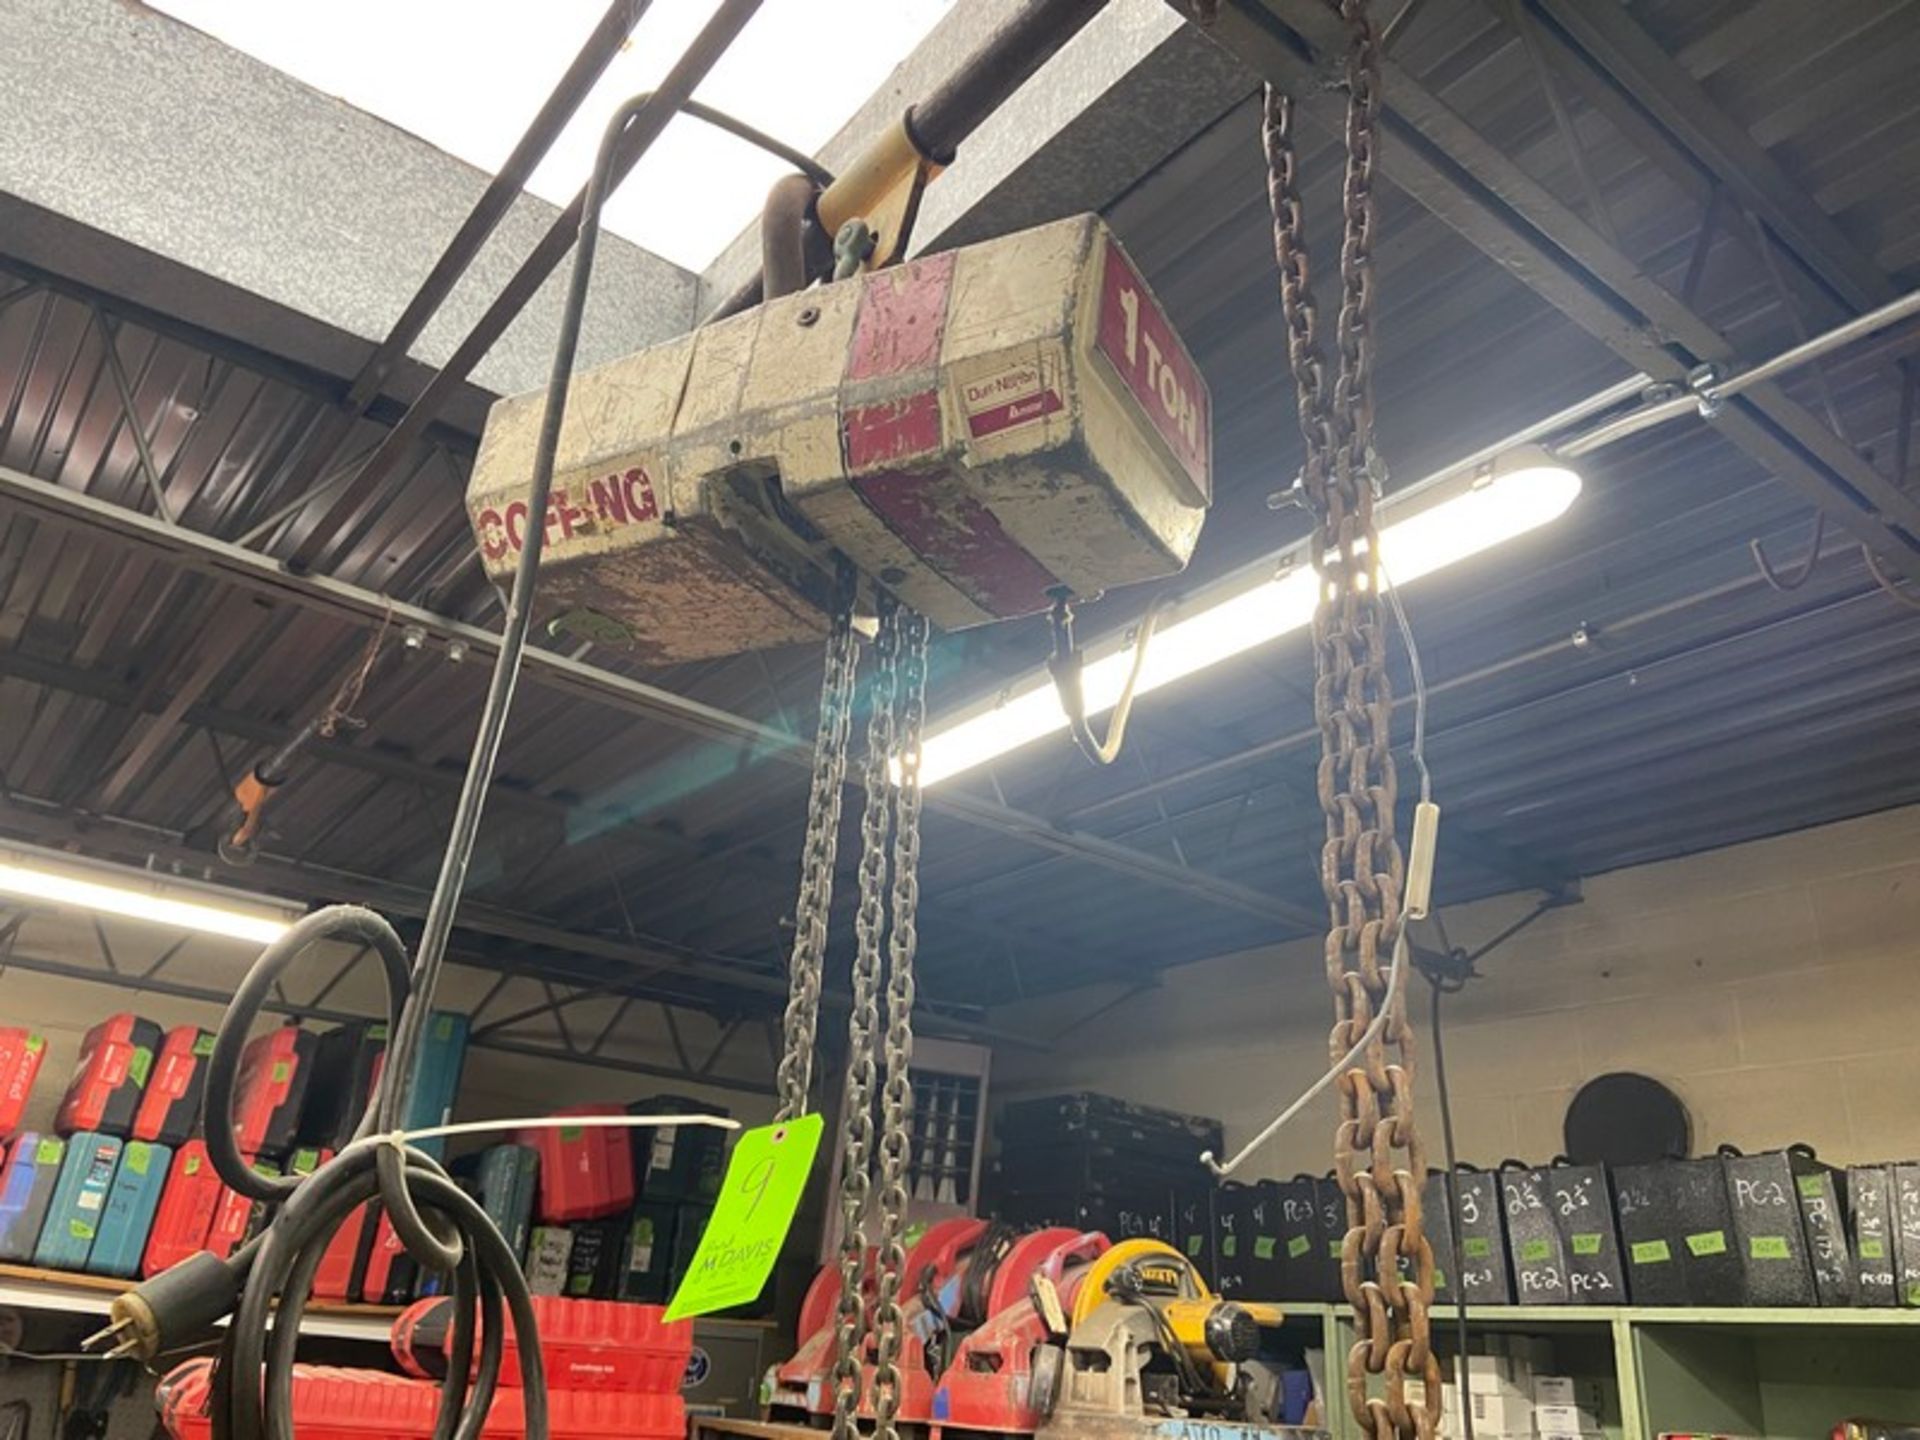 Coffing 1-Ton Electric Hoist (LOCATED IN MONROEVILLE, PA)(RIGGING, LOADING, & SITE MANAGEMENT - Image 2 of 4